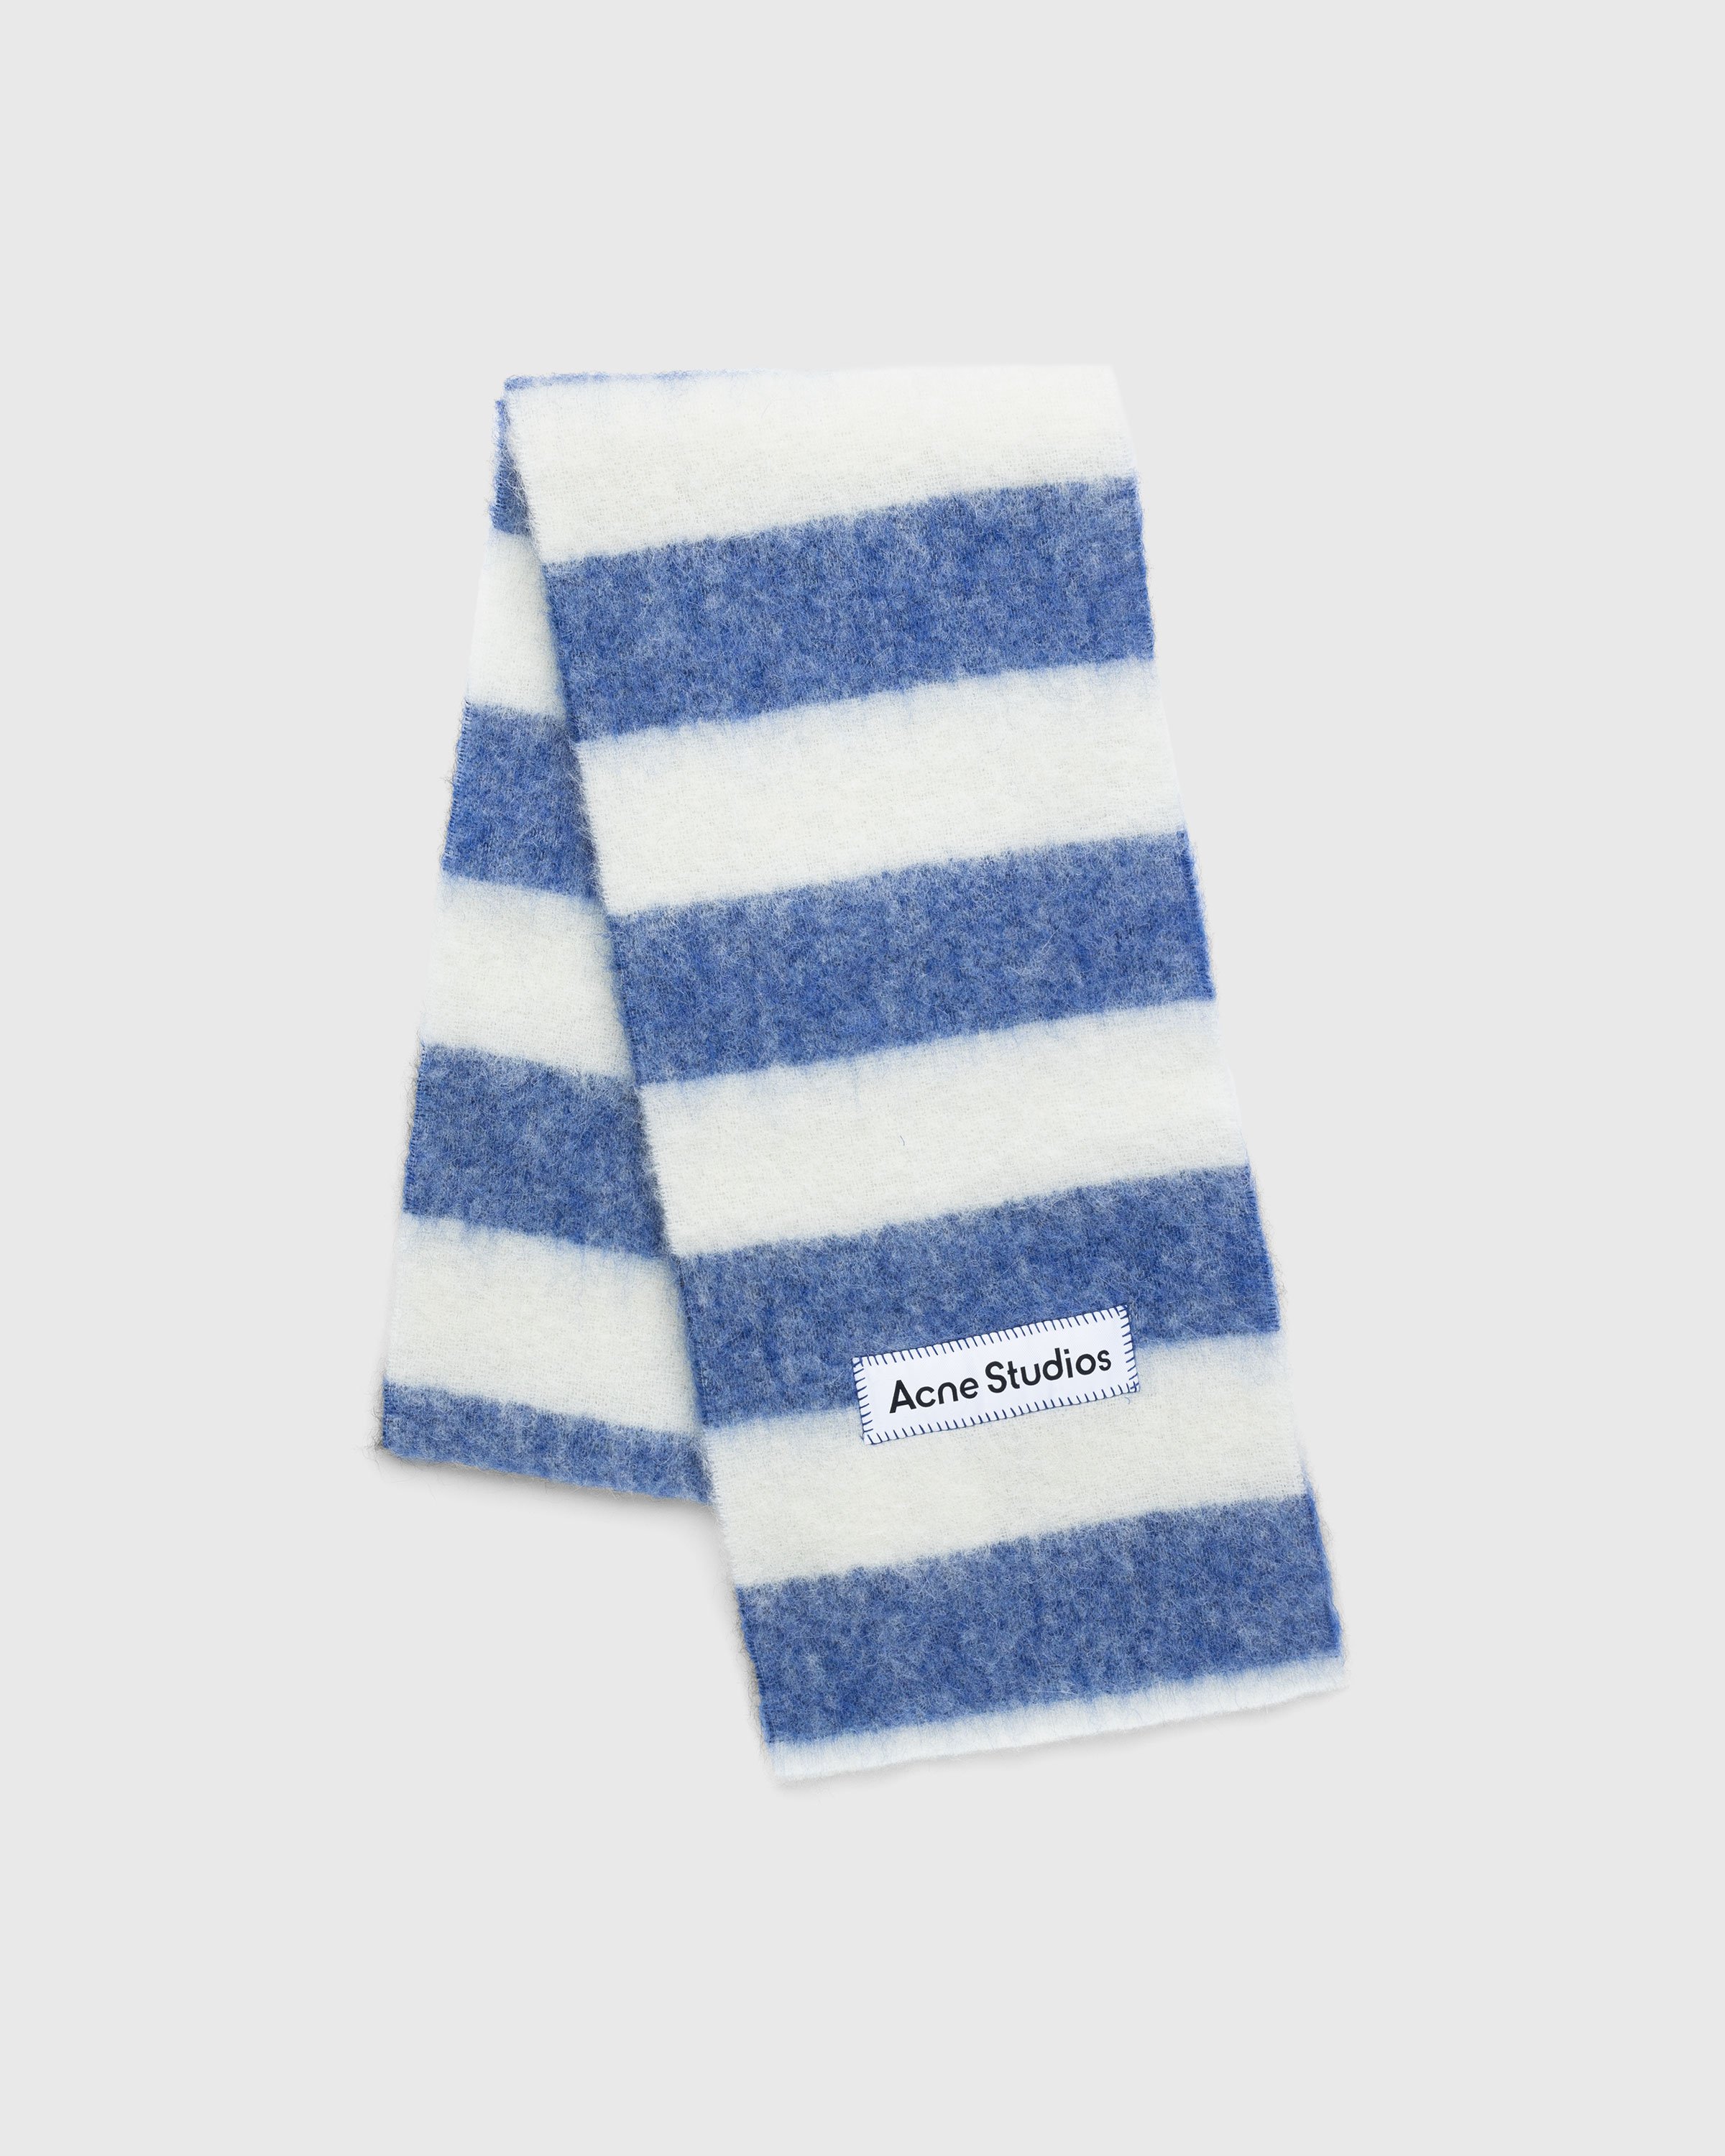 Acne Studios - Striped Wool Blend Scarf Blue/White - Accessories - Blue - Image 2